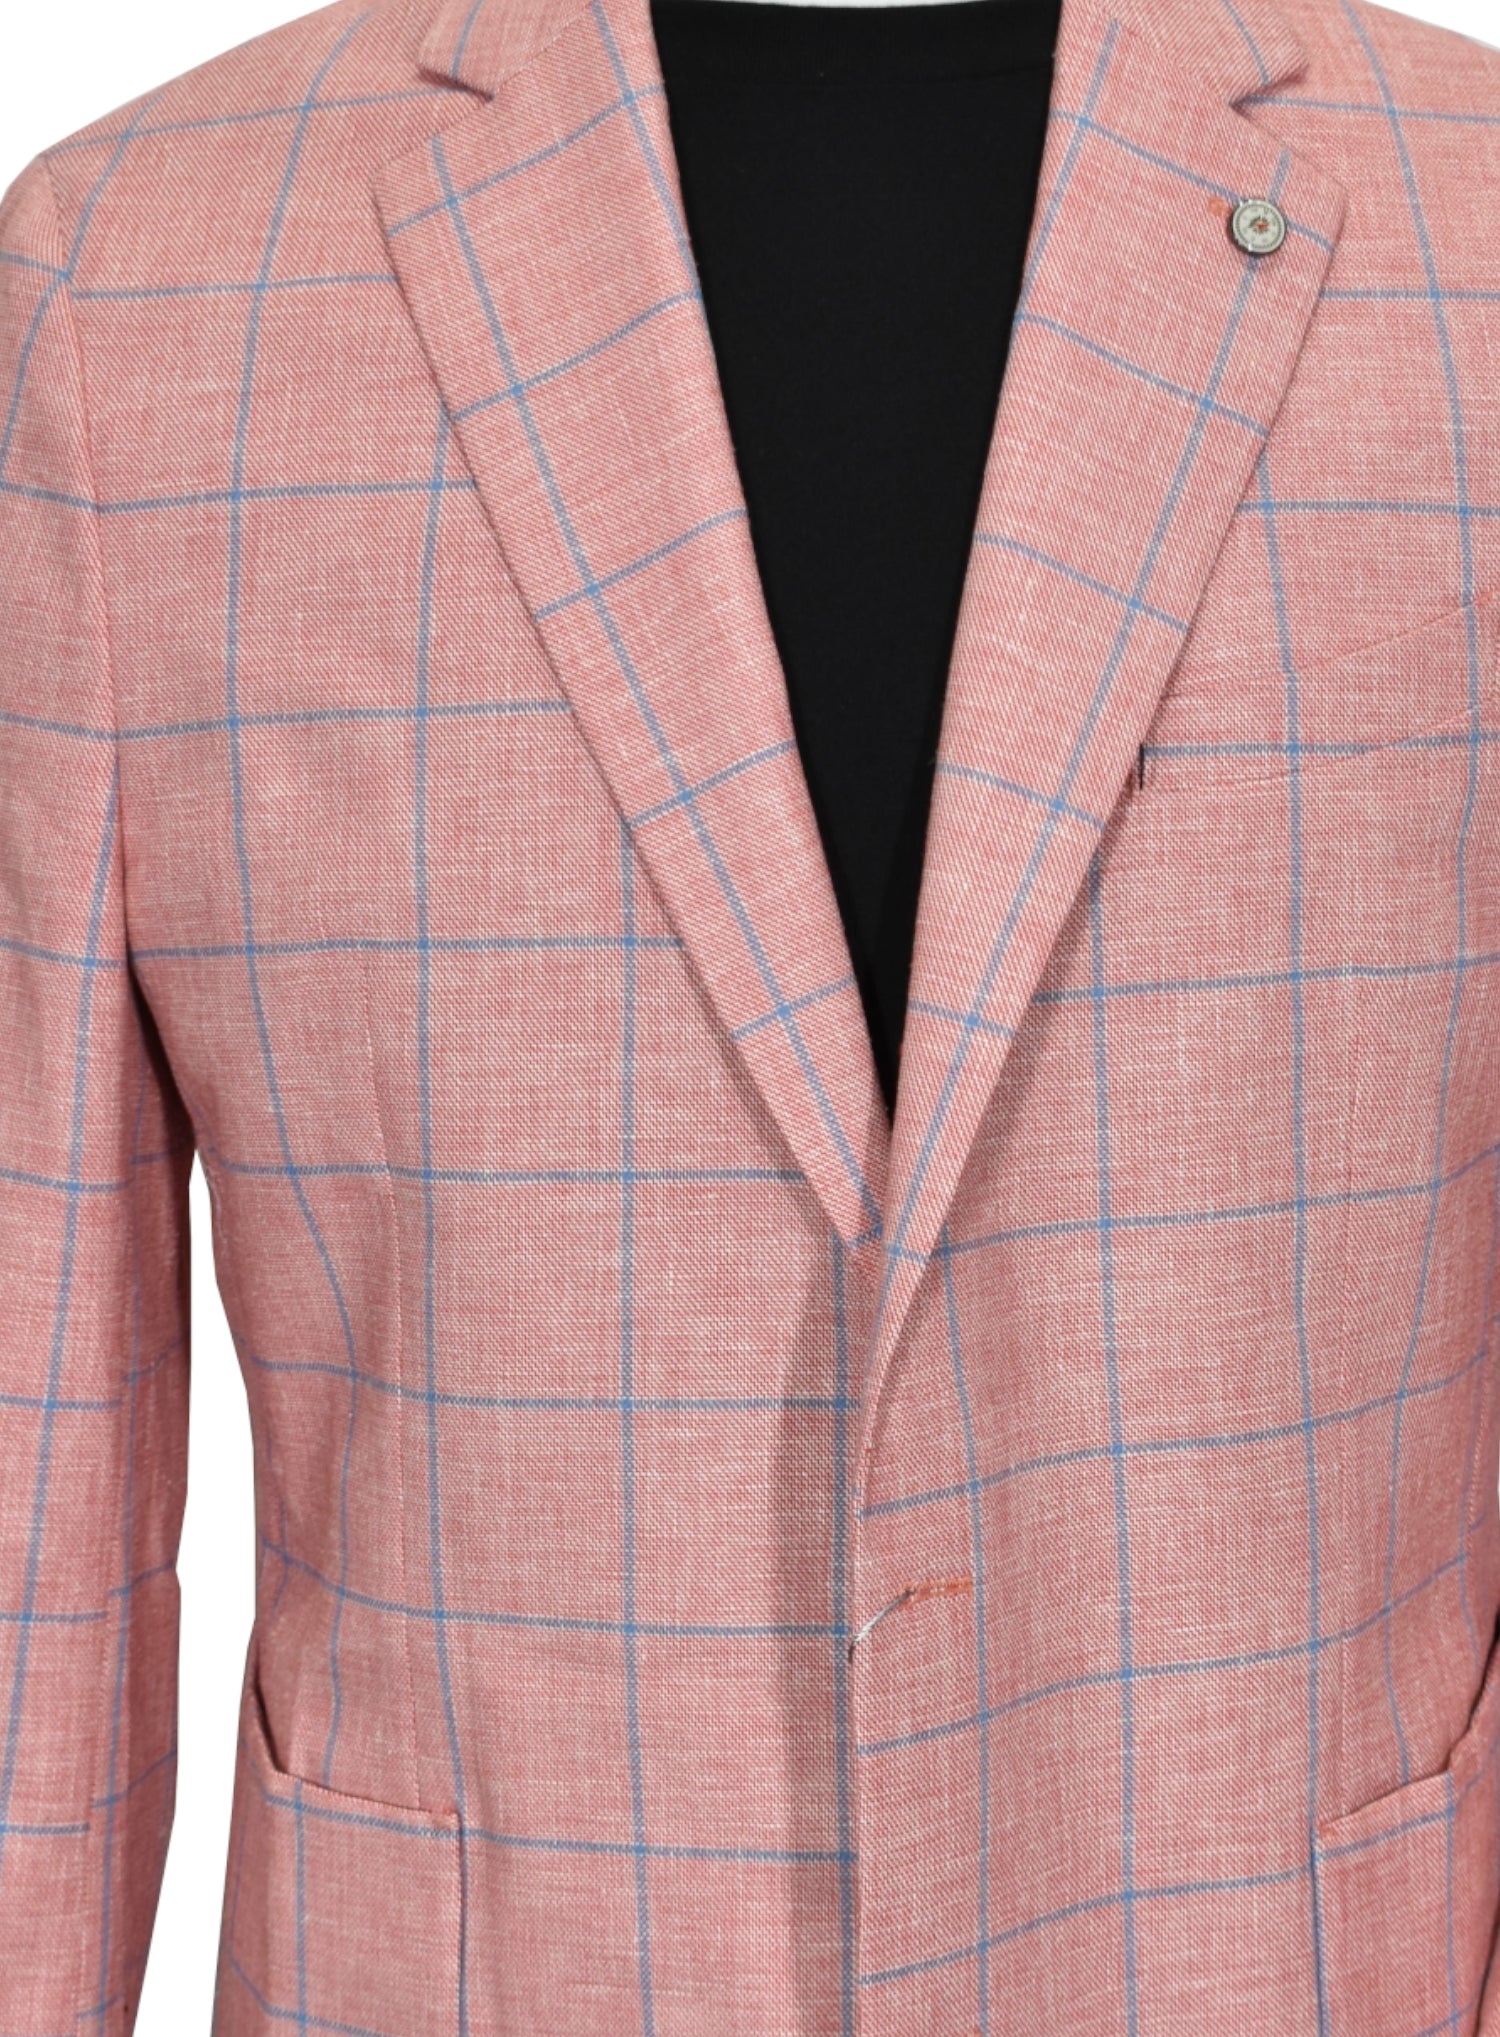 Style this fashion sport coat either cool and casual with jeans or dress it up with a dressy pant and sport shirt. The slim fit stretch model is 72% cotton 26% linen and 2% spandex, and side vented. 